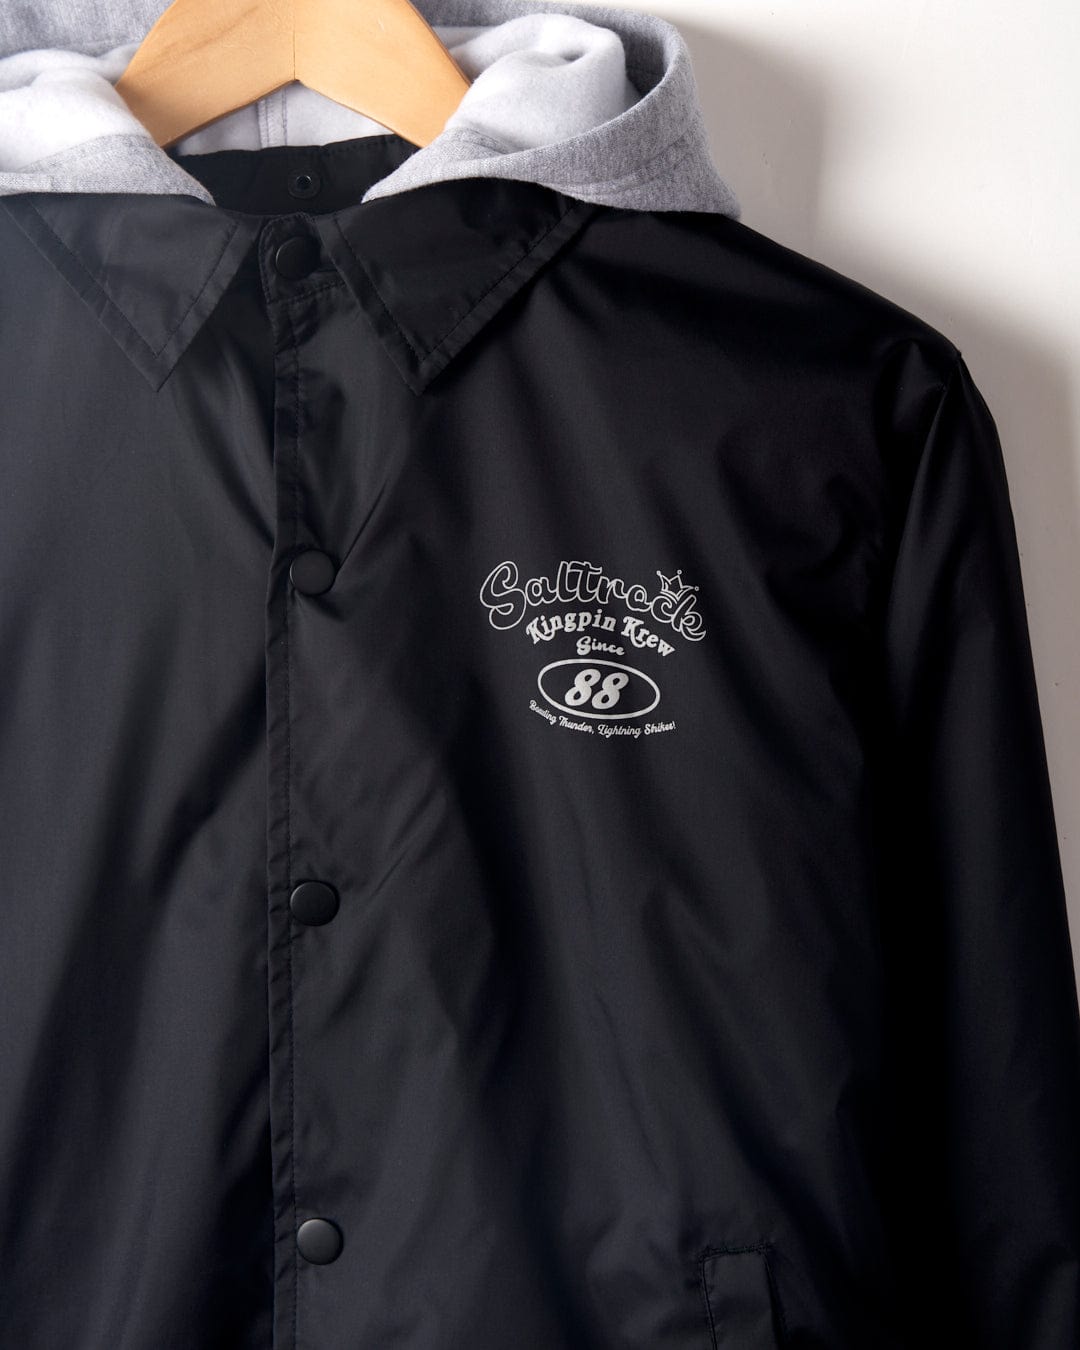 Close-up of a black, water-resistant Kingpin Krew Kids Coach Jacket with a gray hoodie and a logo on the left side reading "culture cafe australia 88 sydney diner.